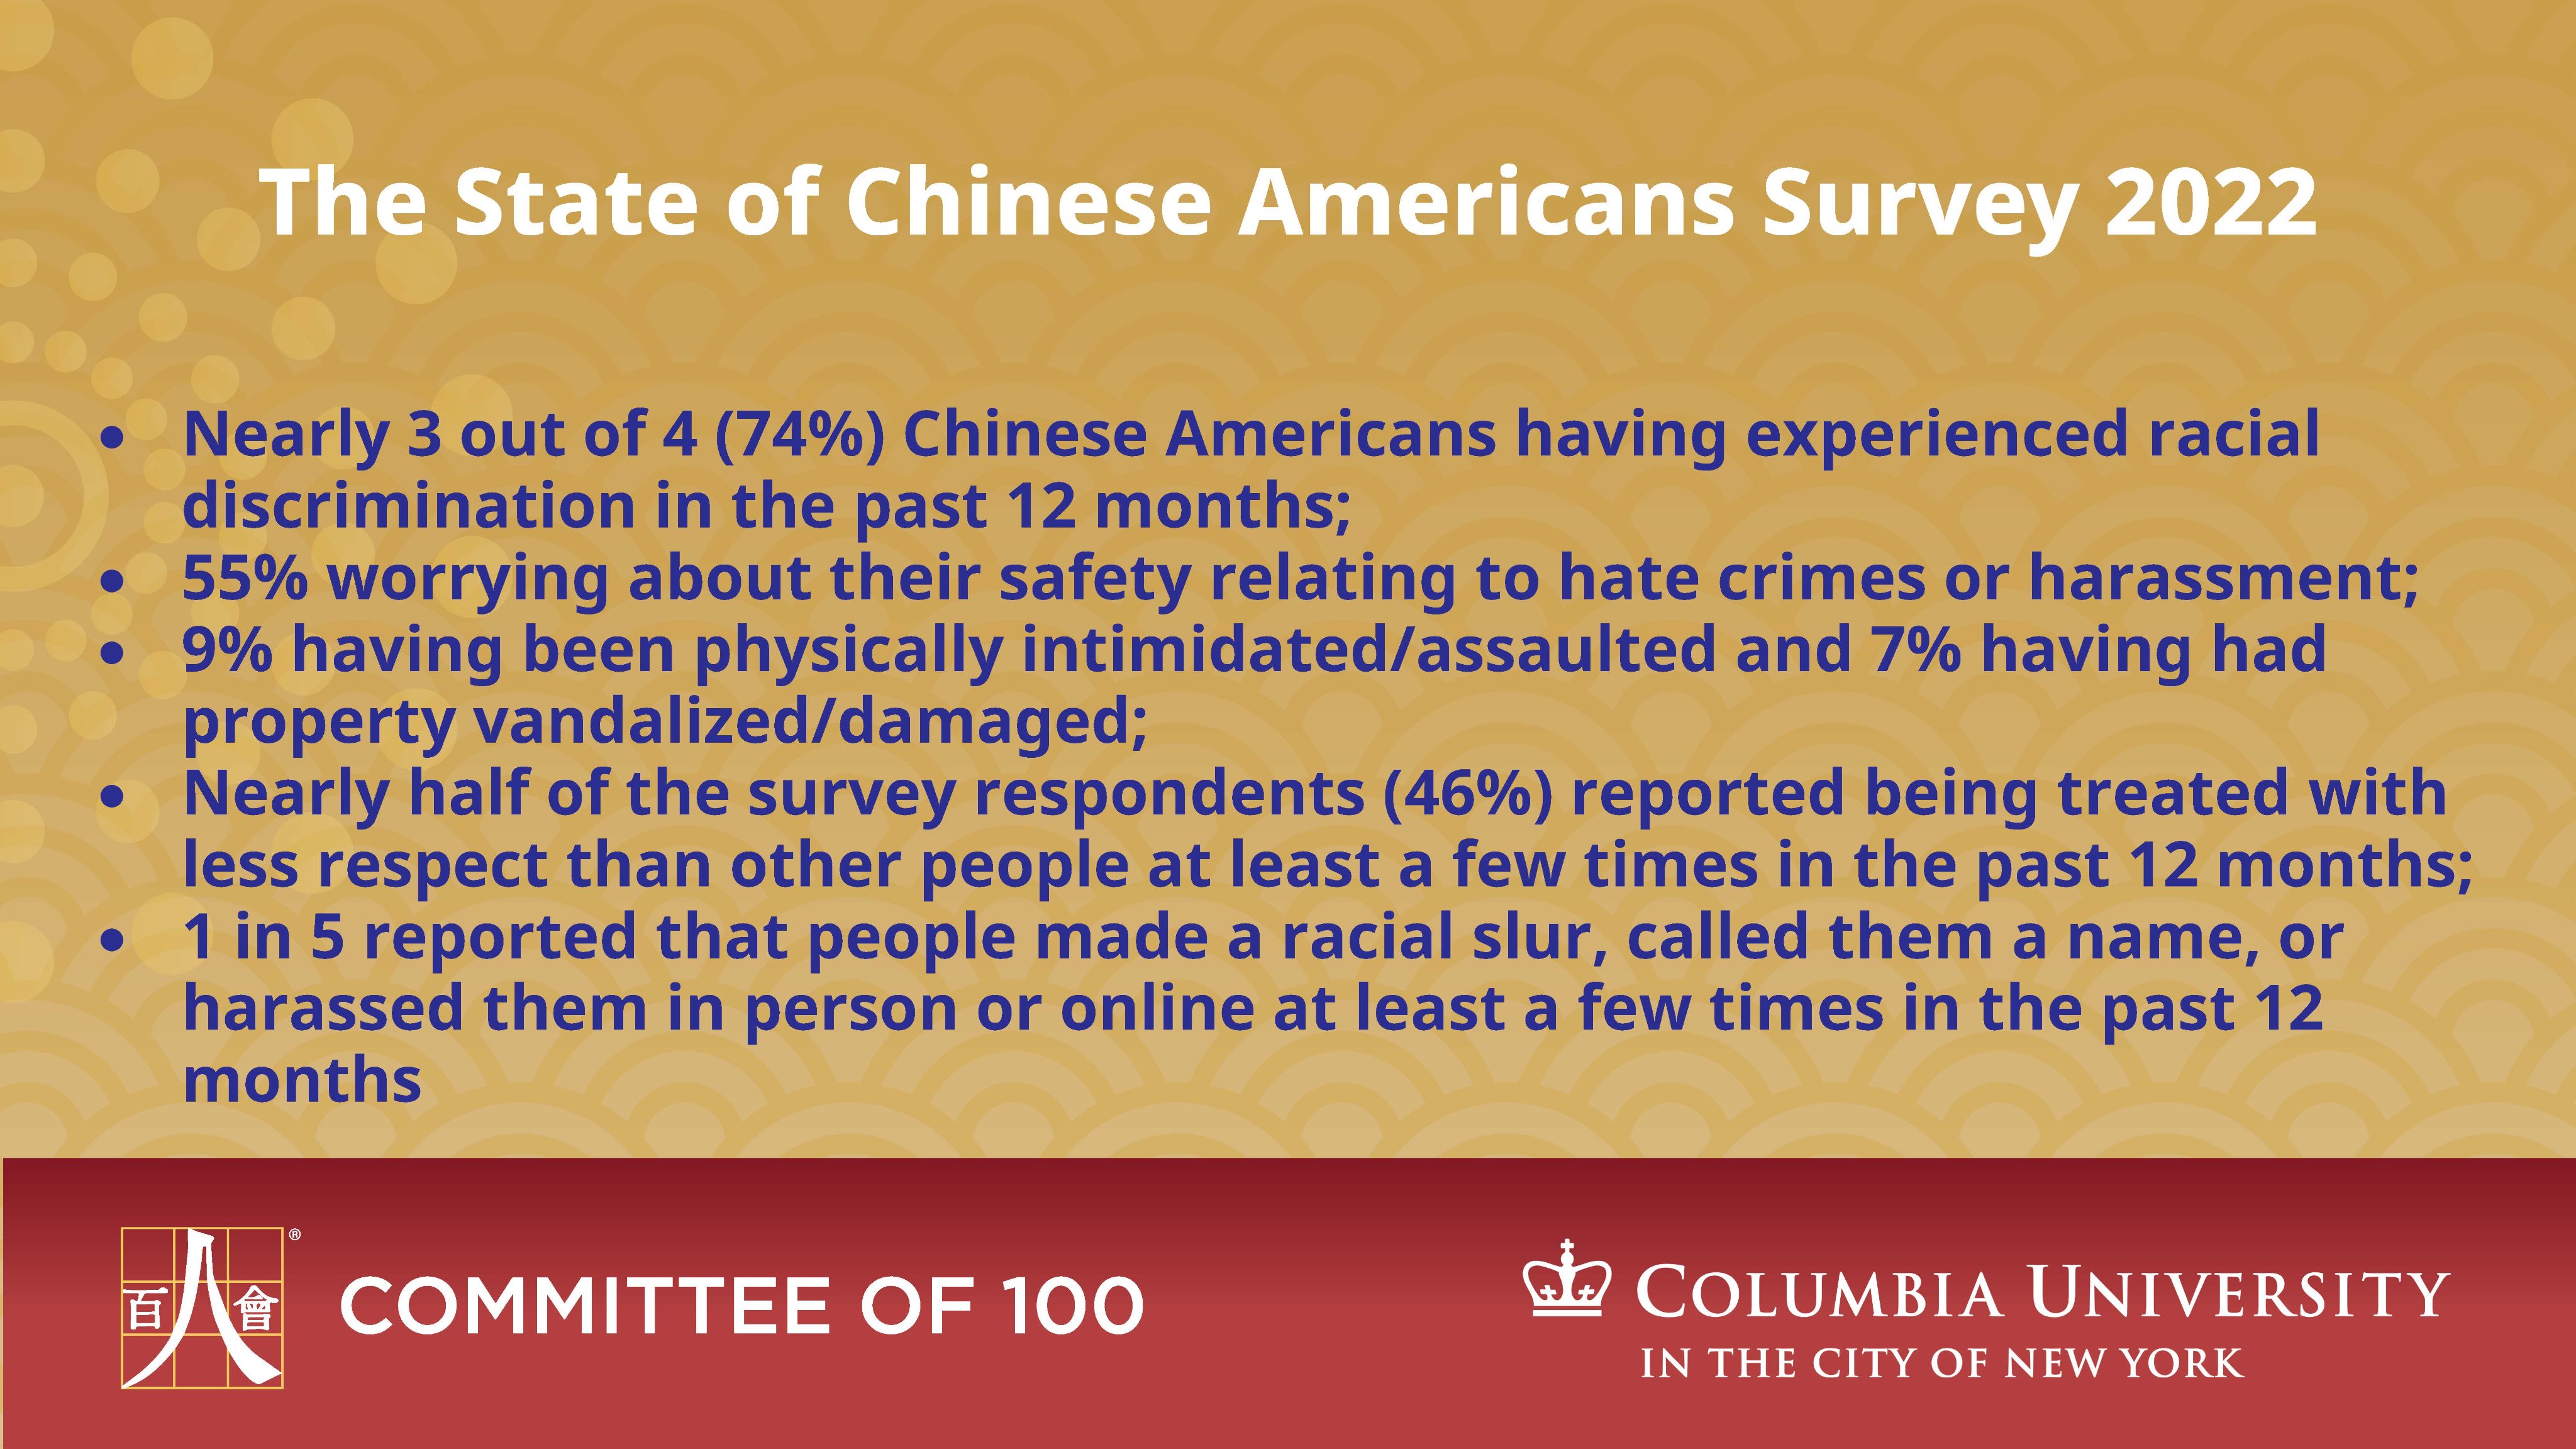 statistics from the state of Chinese Americans Survey